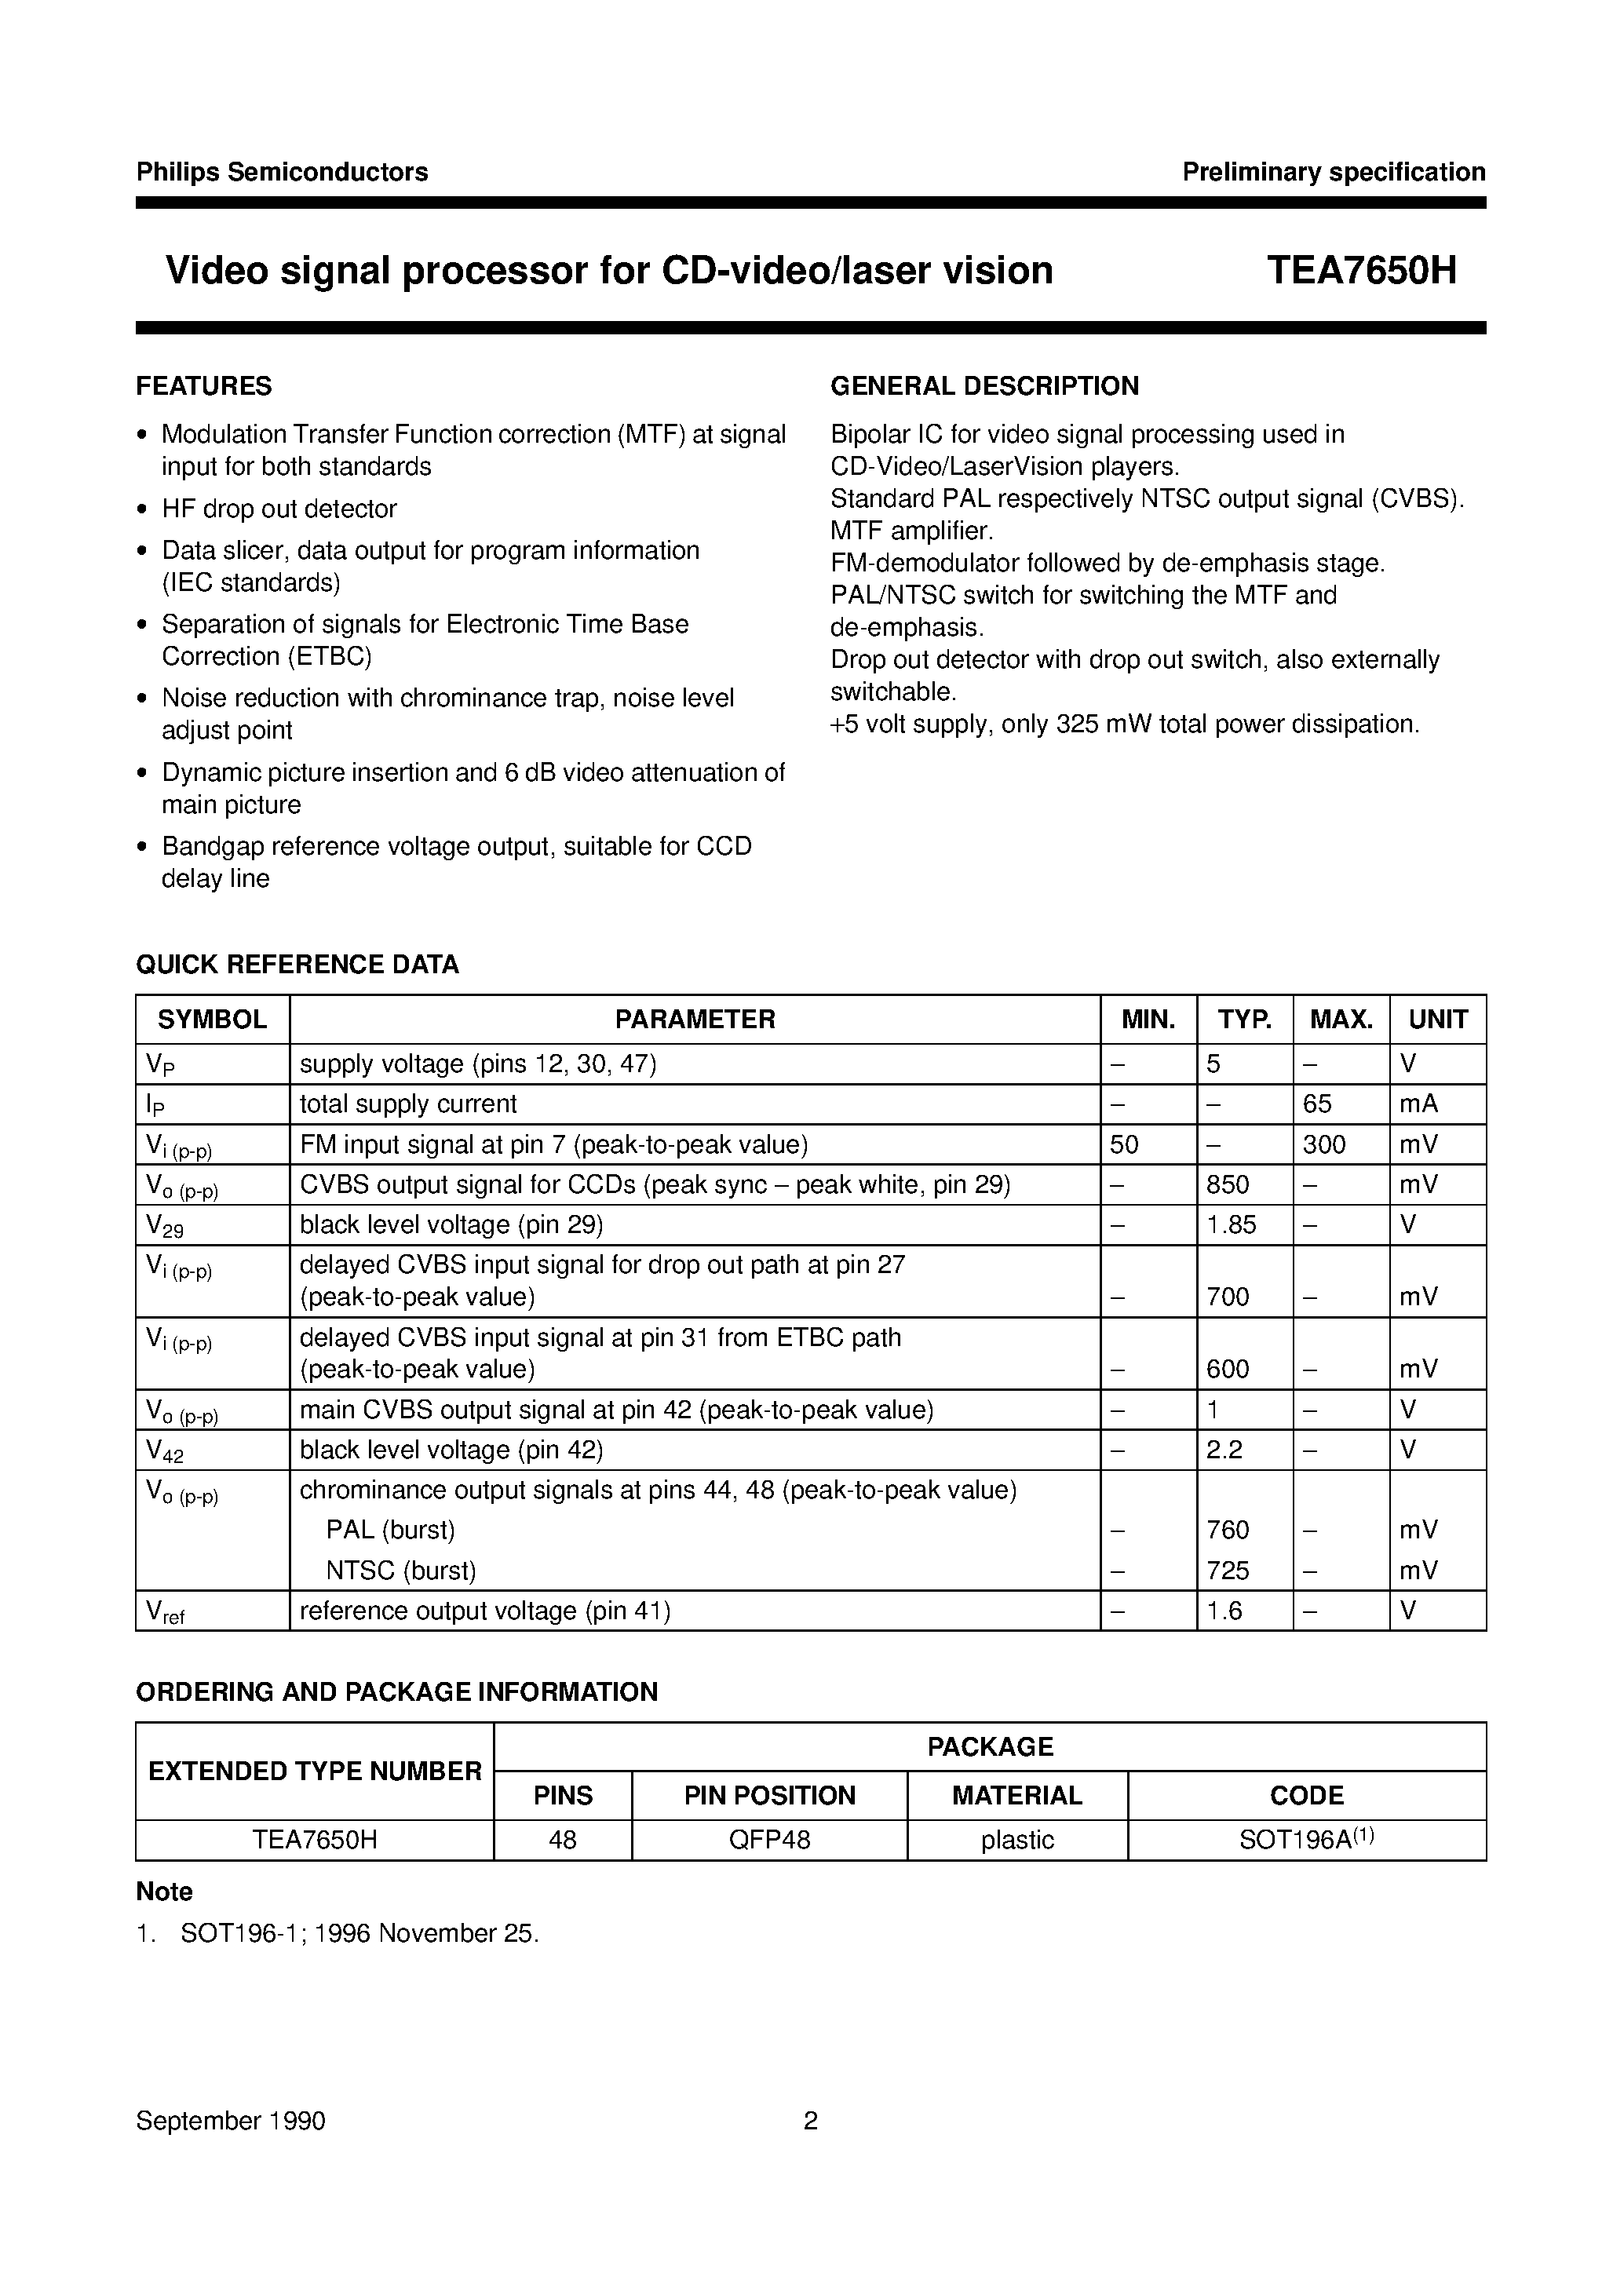 Datasheet TEA7650H - Video signal processor for CD-video/laser vision page 2